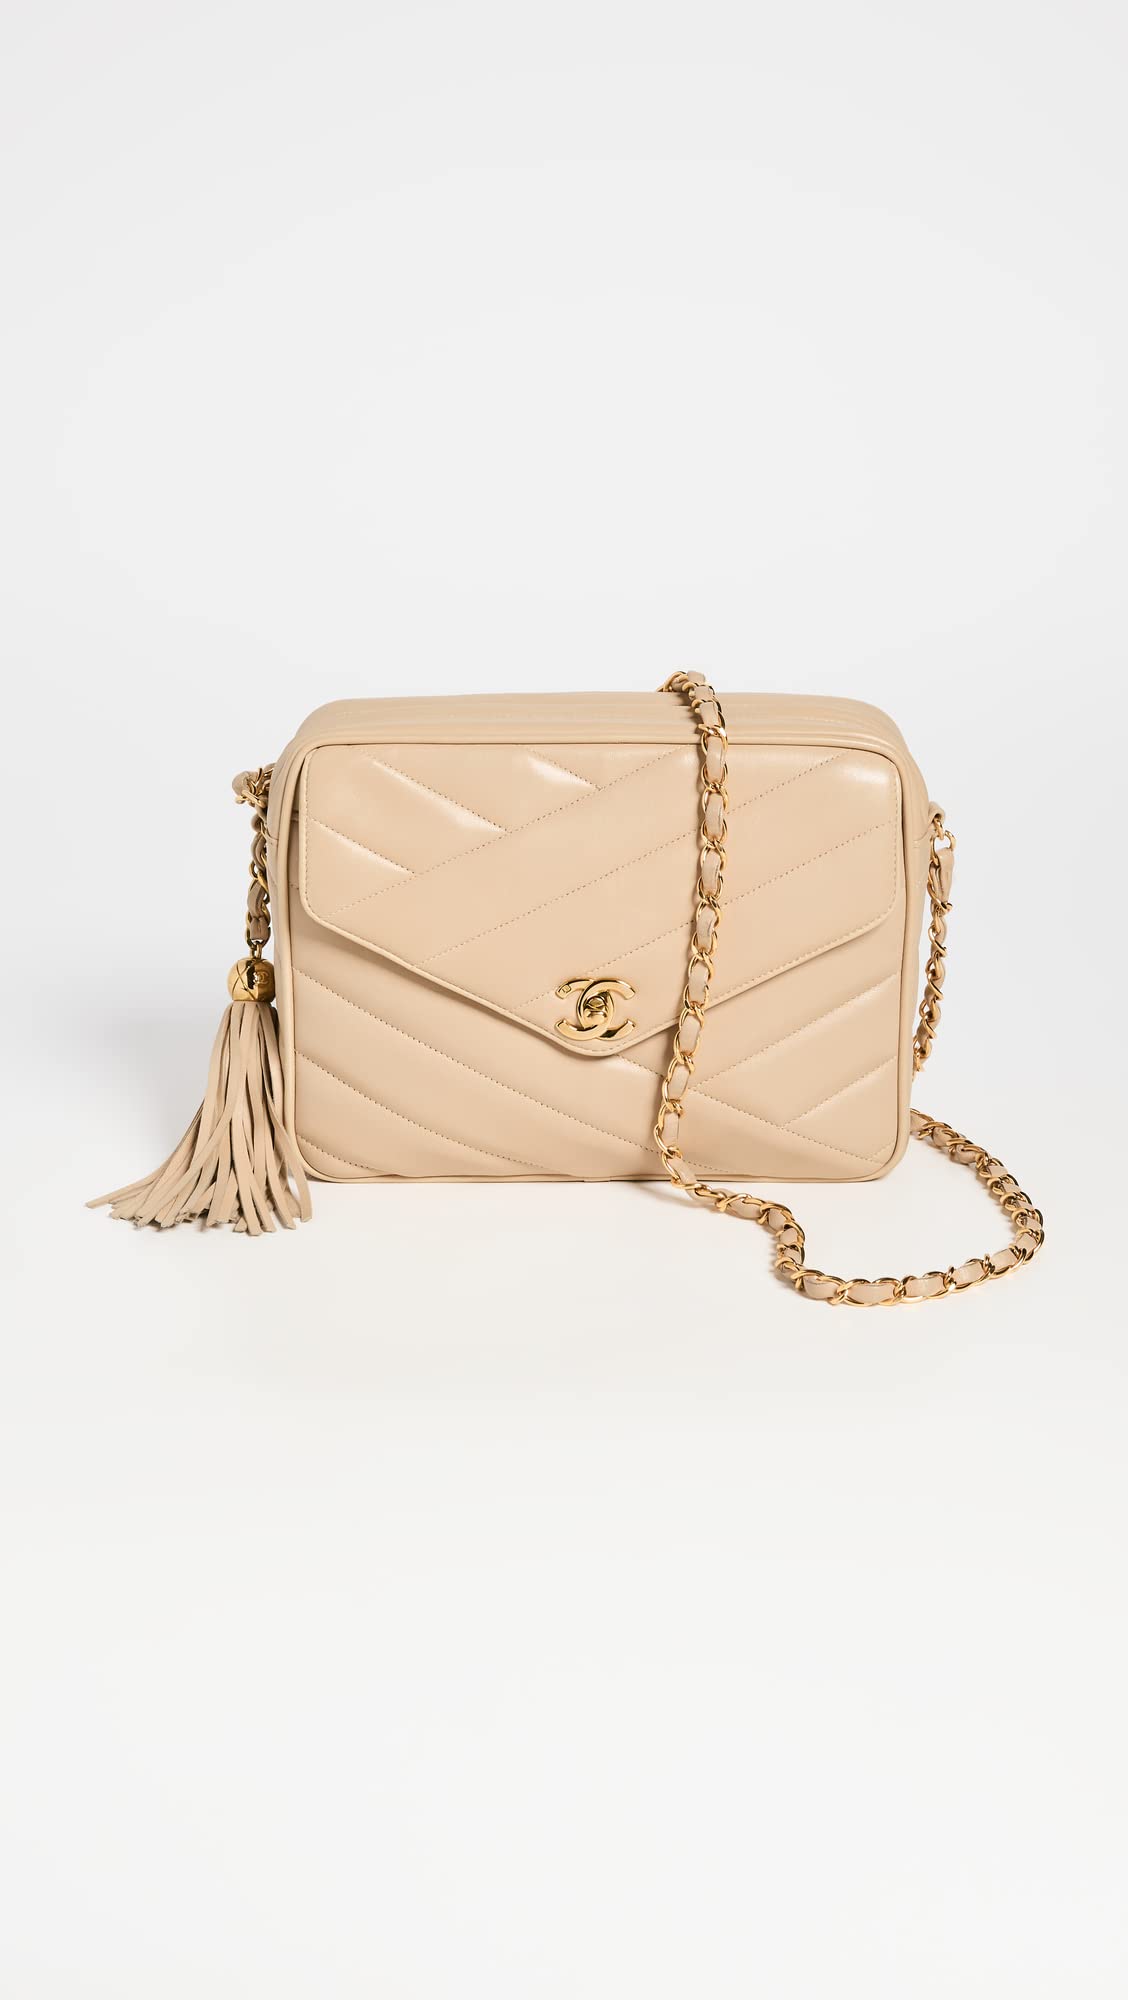 CHANEL Women's Pre-Loved Beige Quilted Crossbody Bag